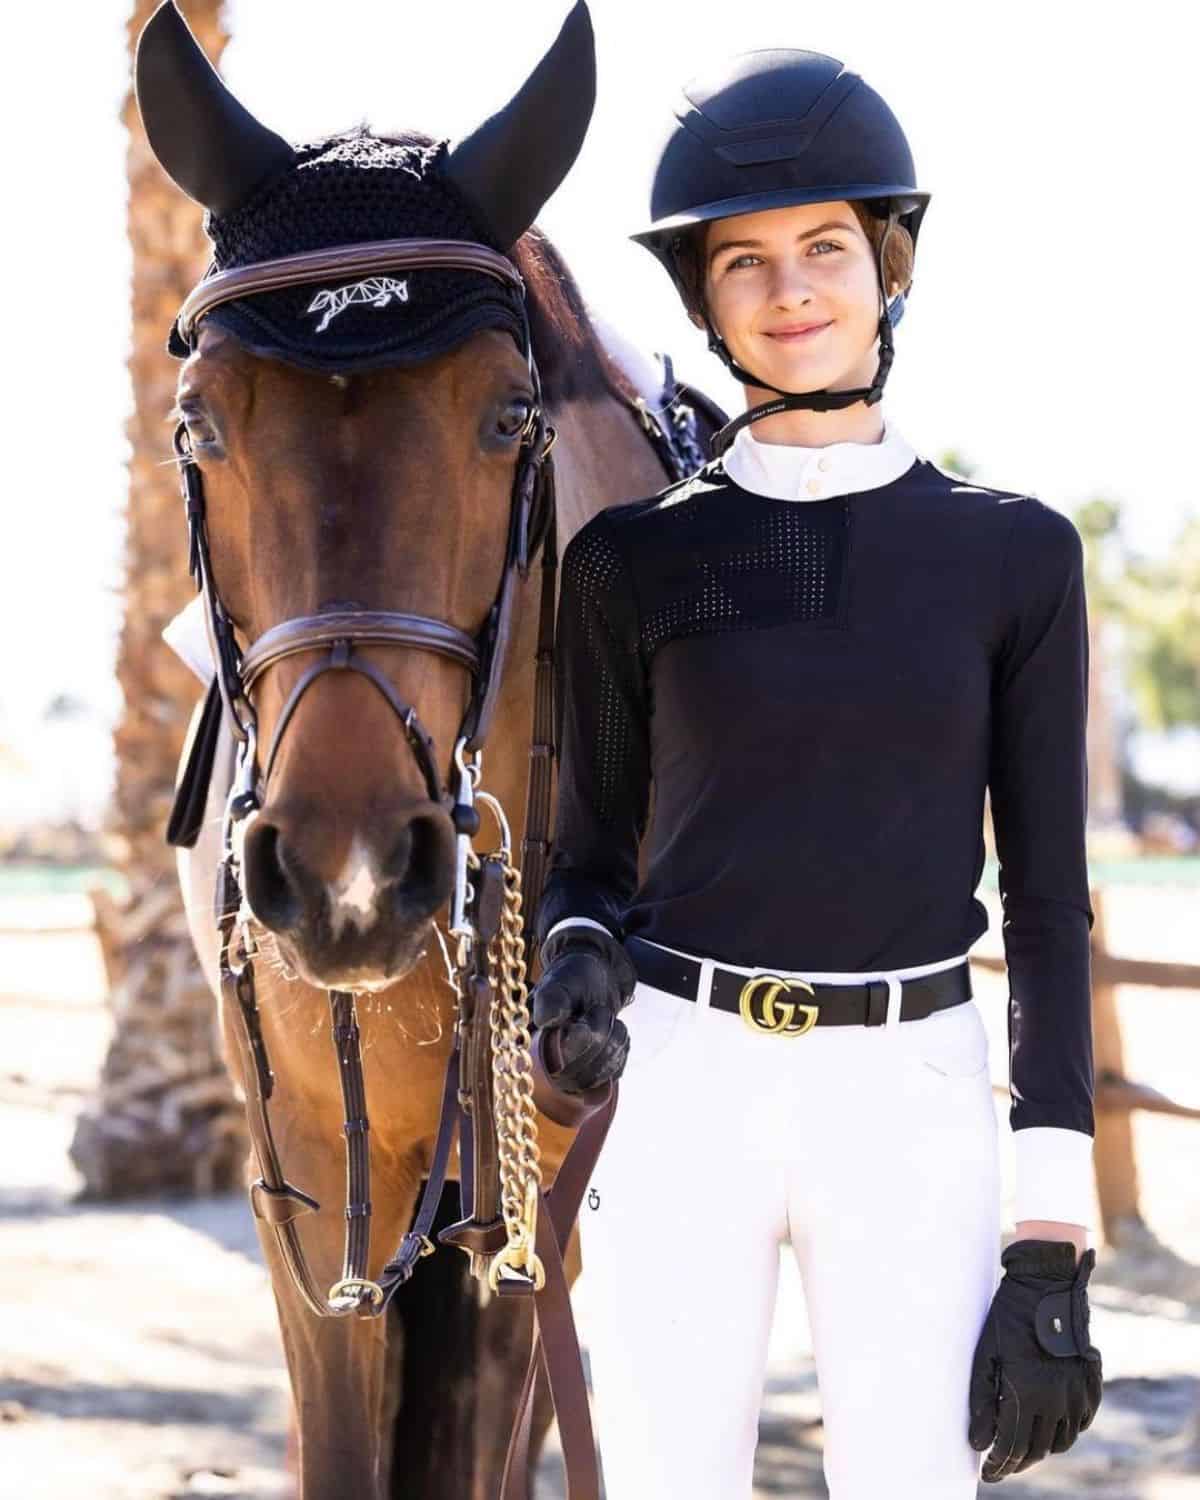 A young woman in an equestrian outfit stands next to a brown horse.